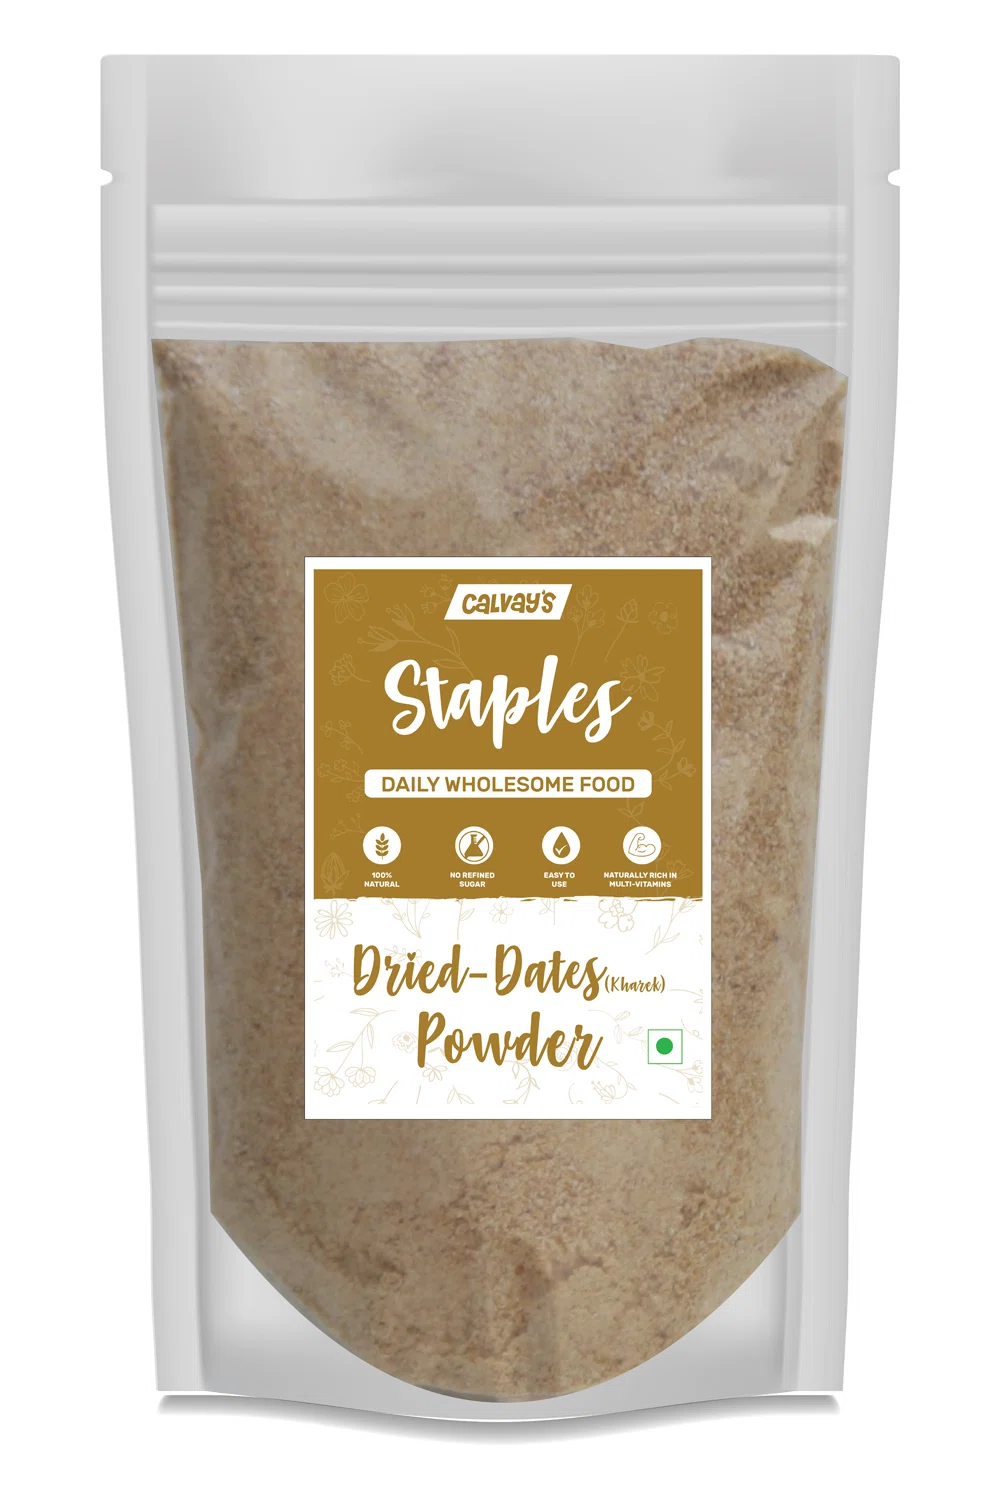 Calvay's Staples Dried Dates powder front